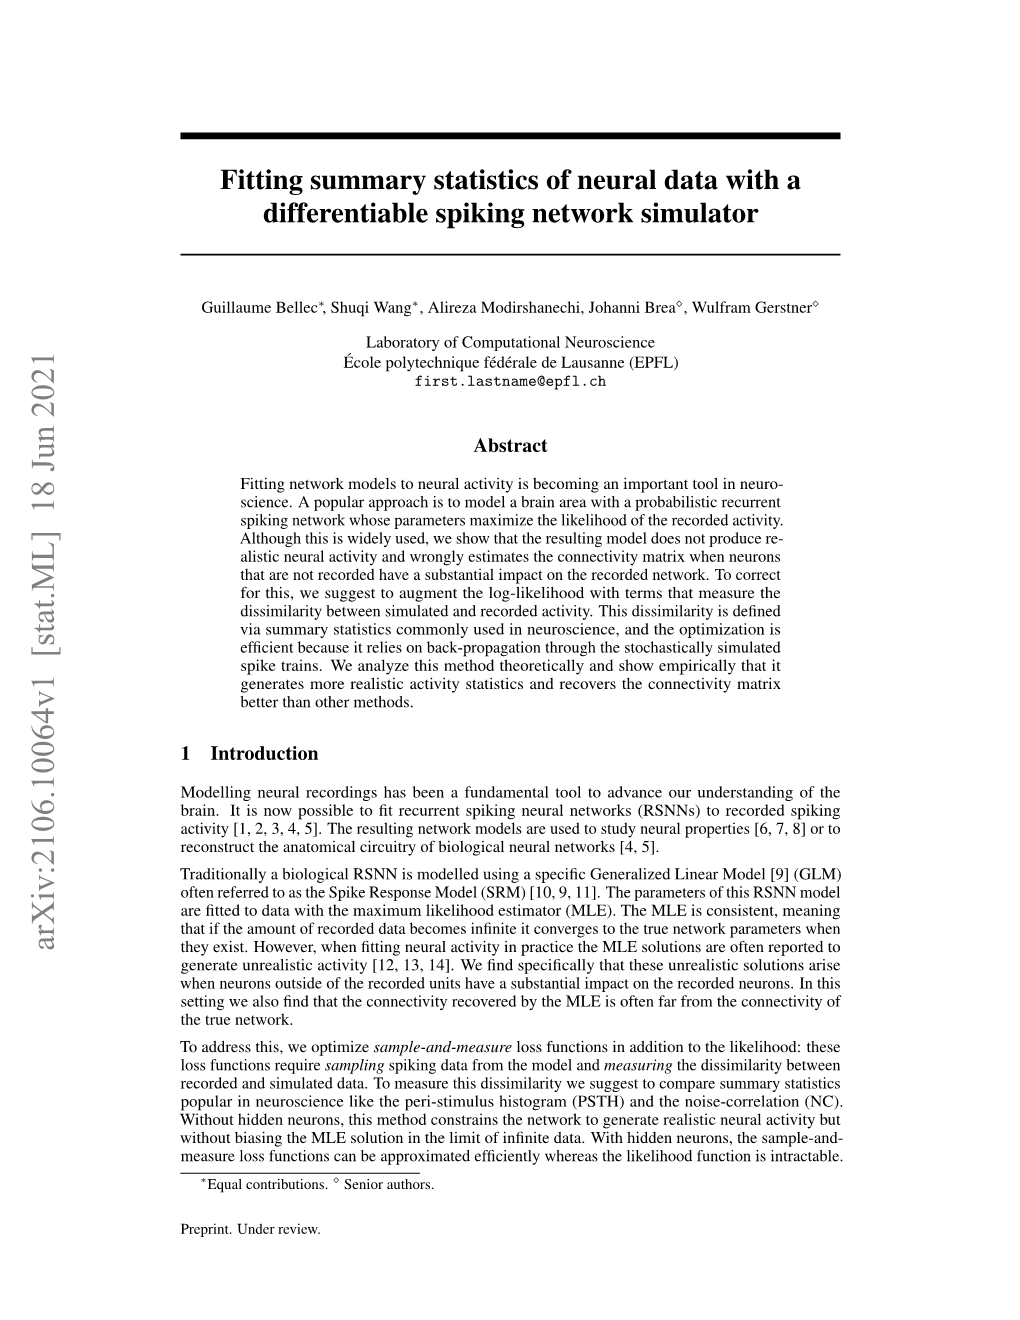 Fitting Summary Statistics of Neural Data with a Differentiable Spiking Network Simulator